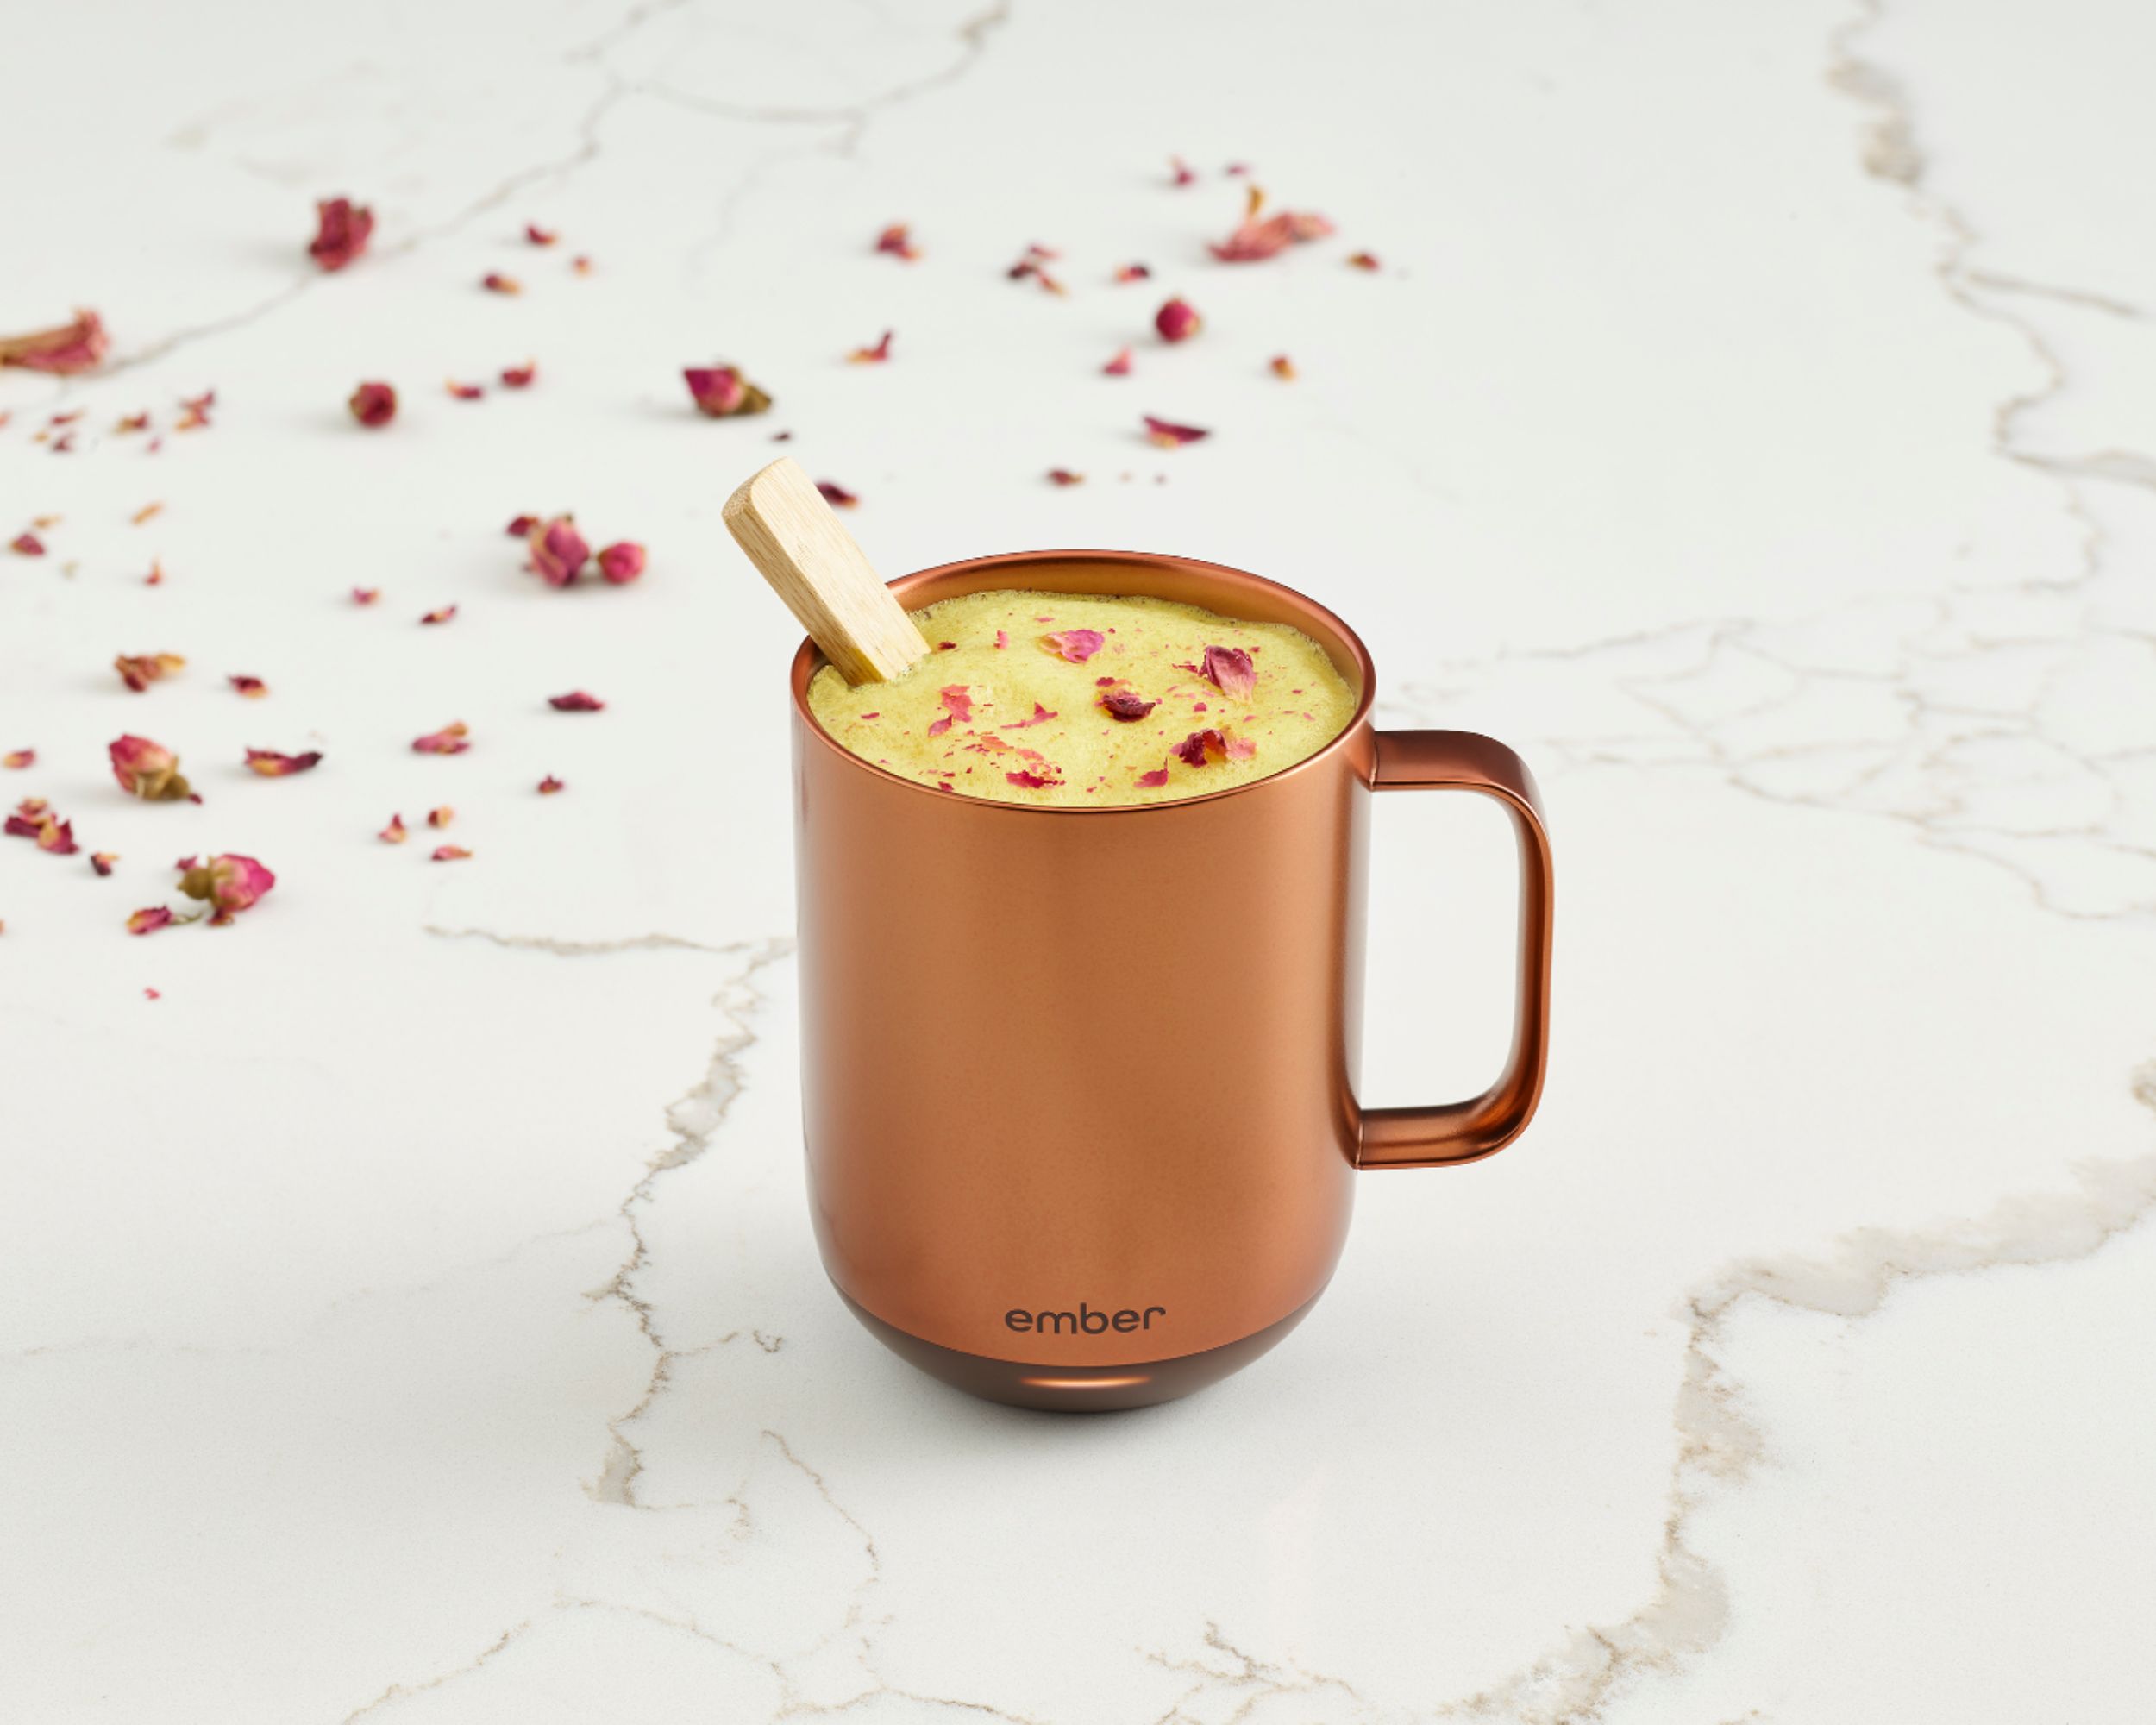 Latest Ember Mug Model Sale at Best Buy: Get It for $30 Cheaper – SheKnows